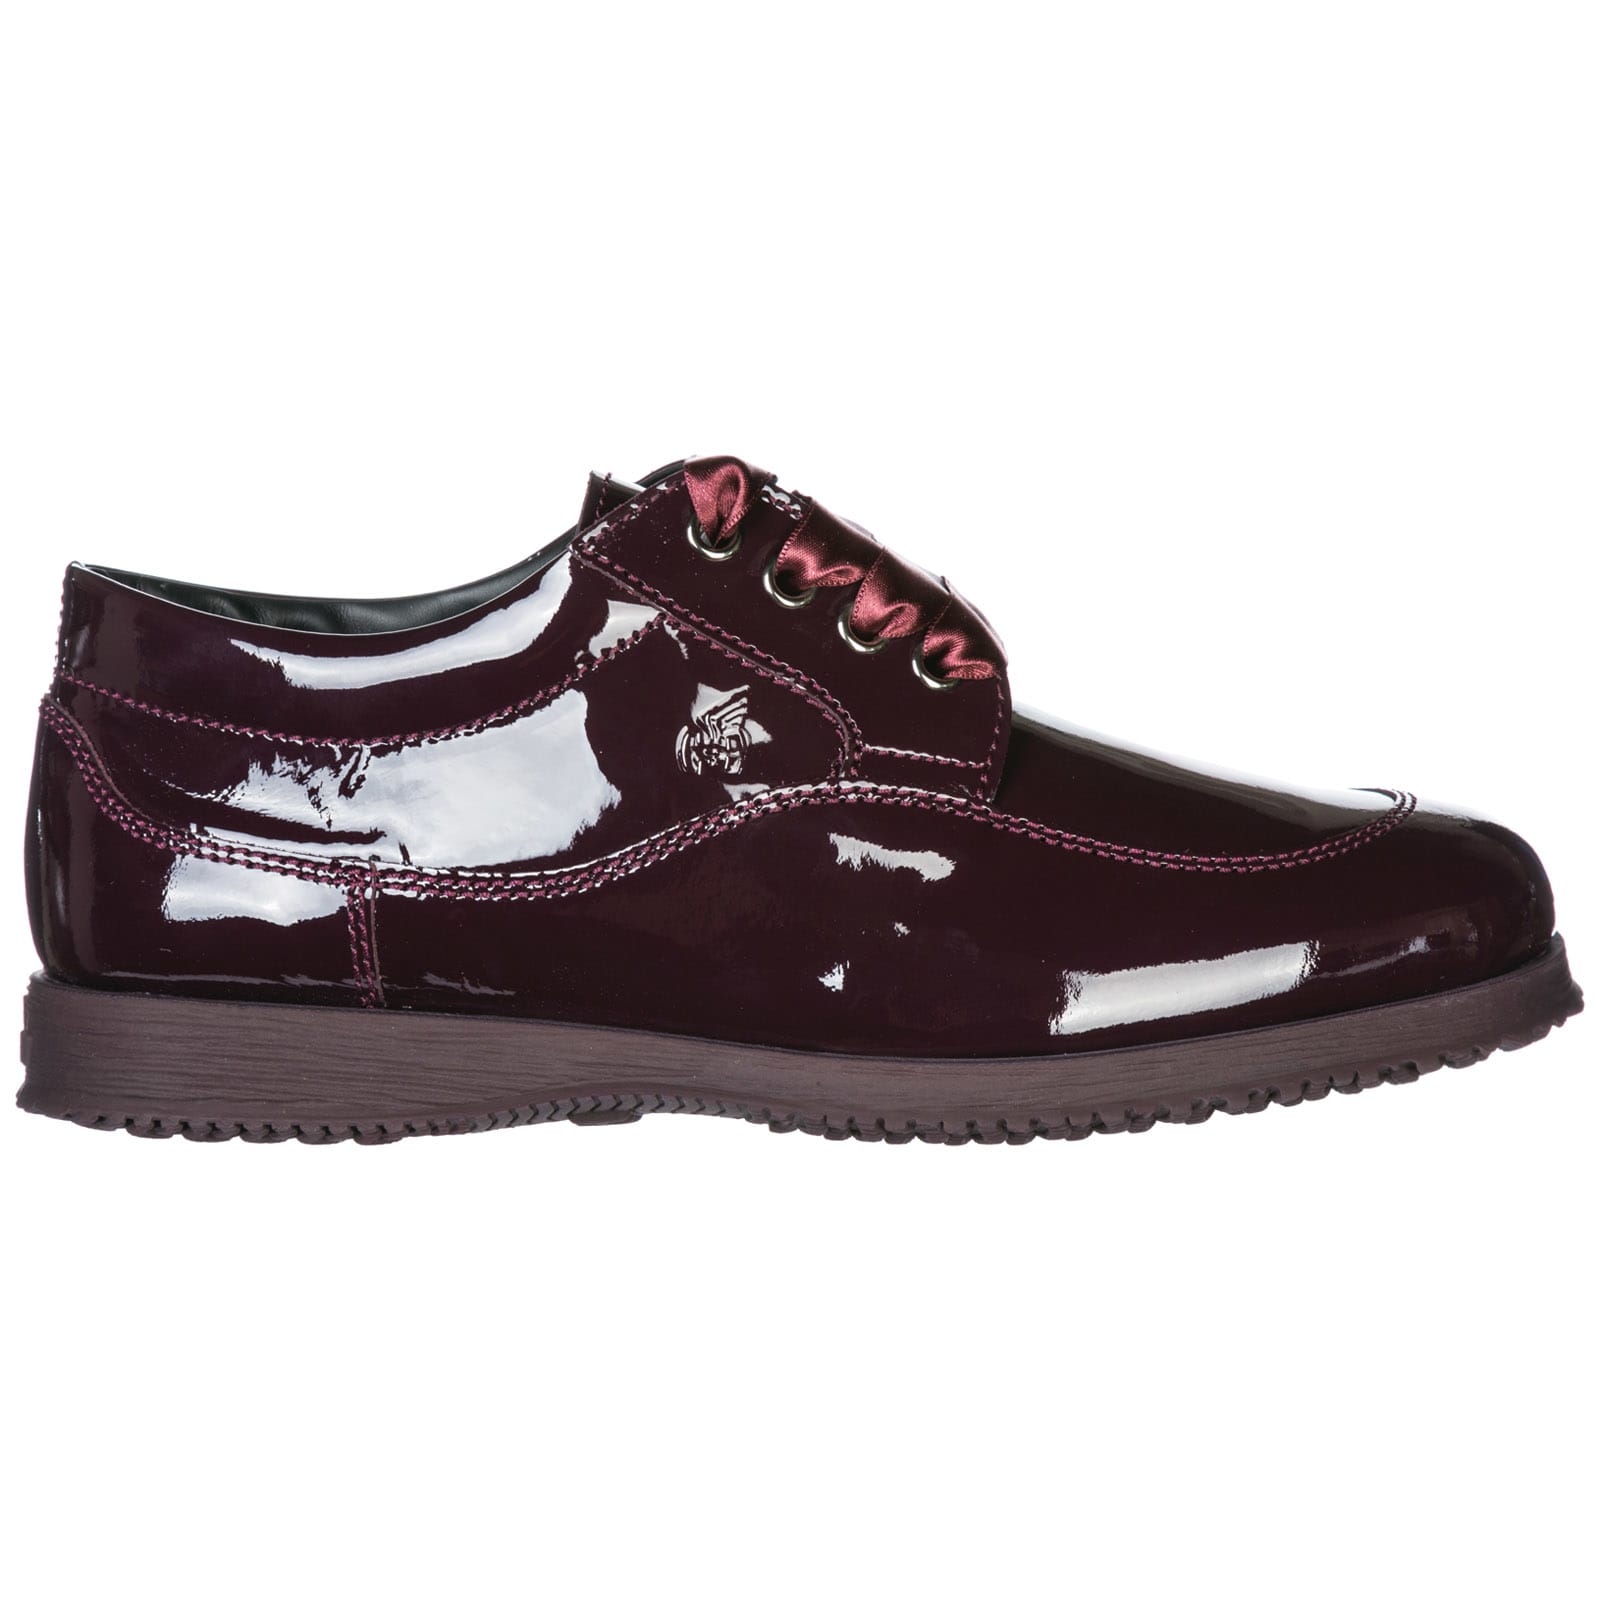 Hogan Traditional Lace-up Shoes